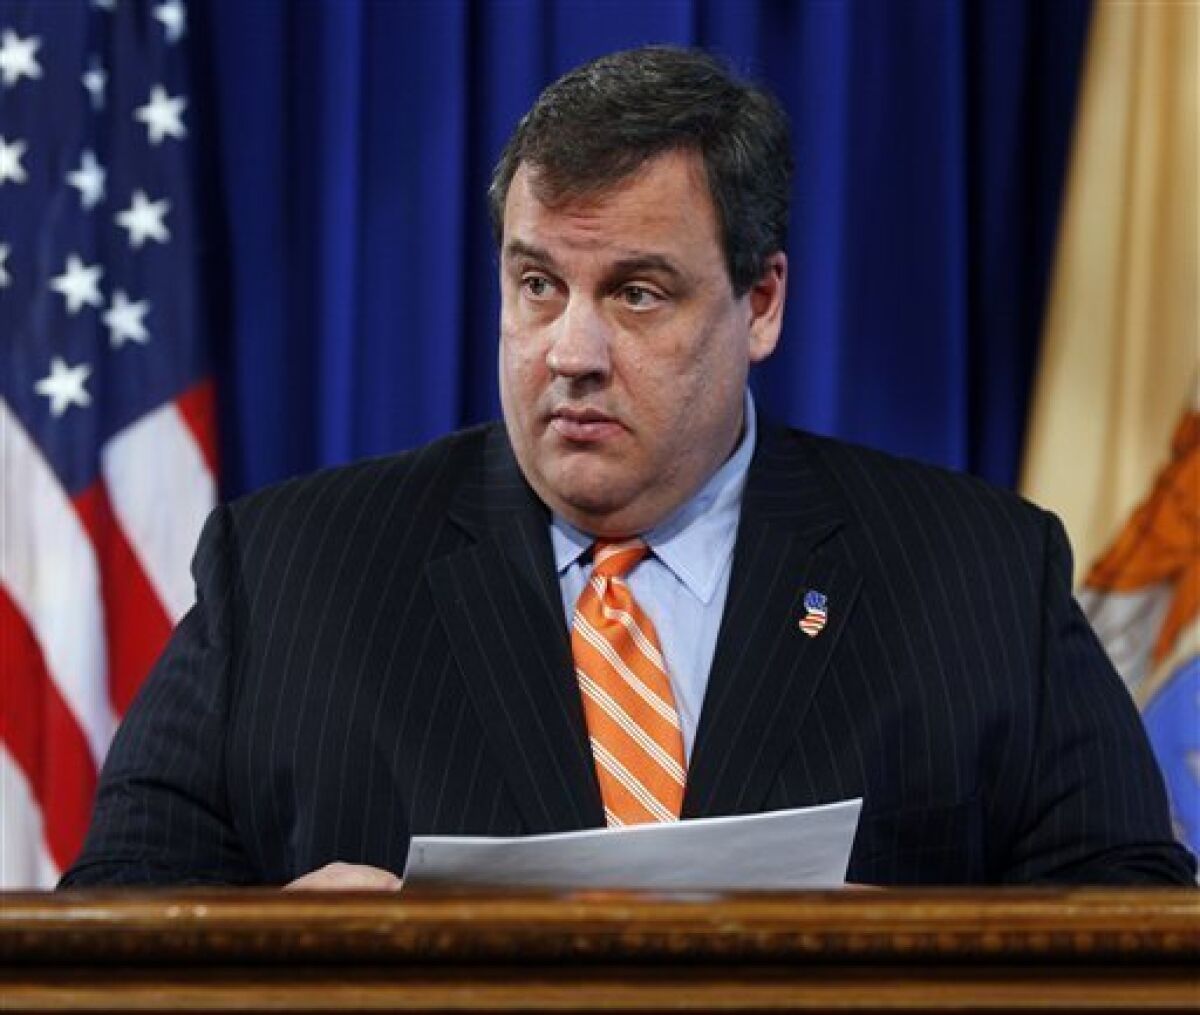 New Jersey Gov. Chris Christie listens to a question in his outer office at the Statehouse Thursday, March 3, 2011, in Trenton, N.J. Earlier Thursday, Christie vetoed a bill that would have made New Jersey the first state in the nation to legalize Internet gambling. At a news conference before the decision was announced, Christie said he was wrestling with "legal and constitutional concerns." (AP Photo/Mel Evans)